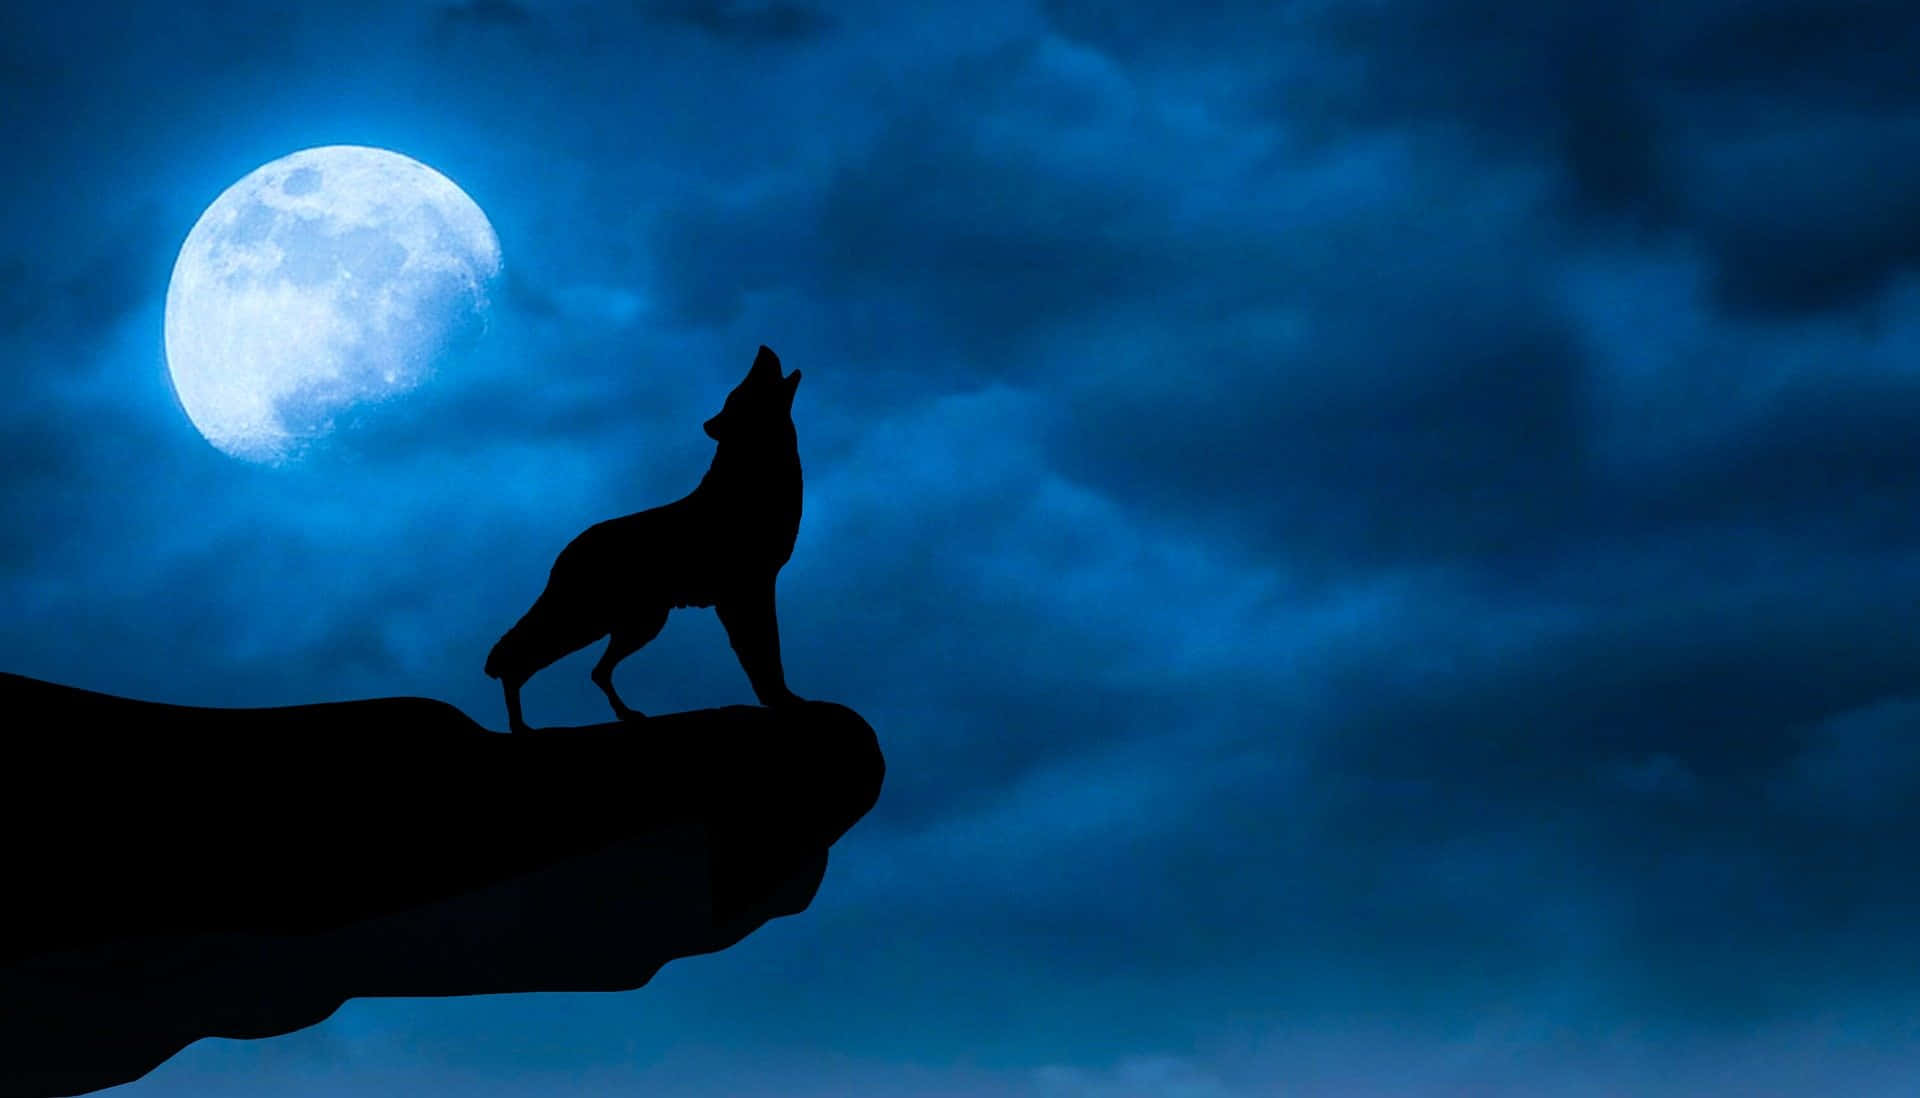 “A mesmerizing display, the Wolf Moon rises full through the night sky.” Wallpaper